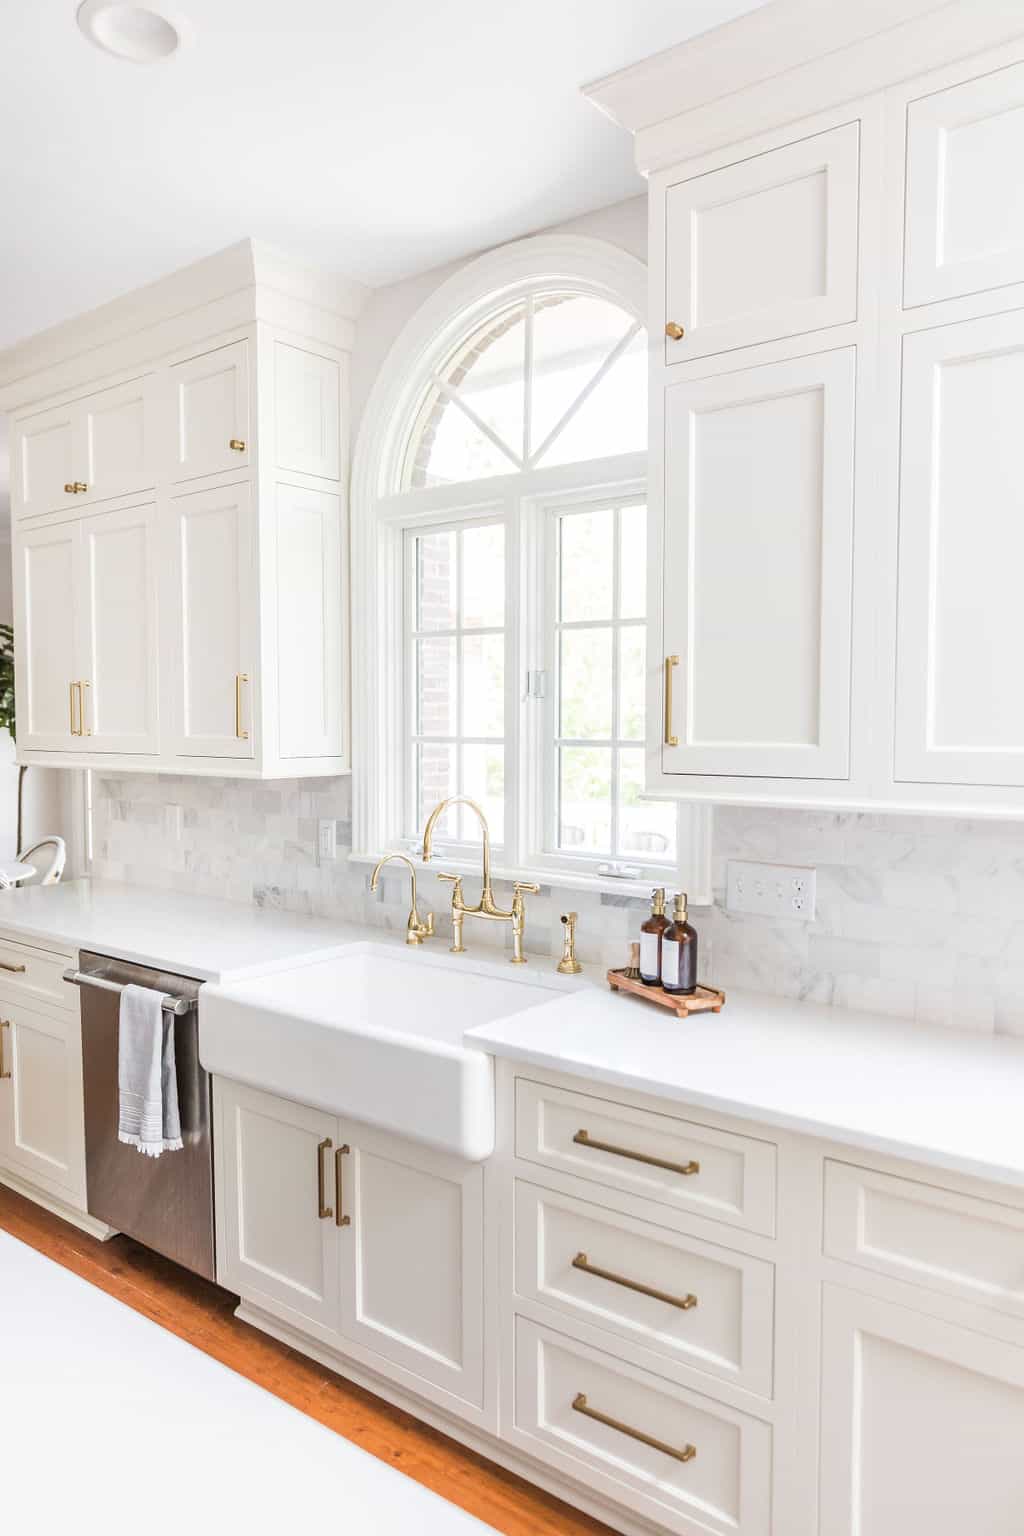 Nicholas Design Build | A remodelled kitchen with white cabinets and a gold sink.